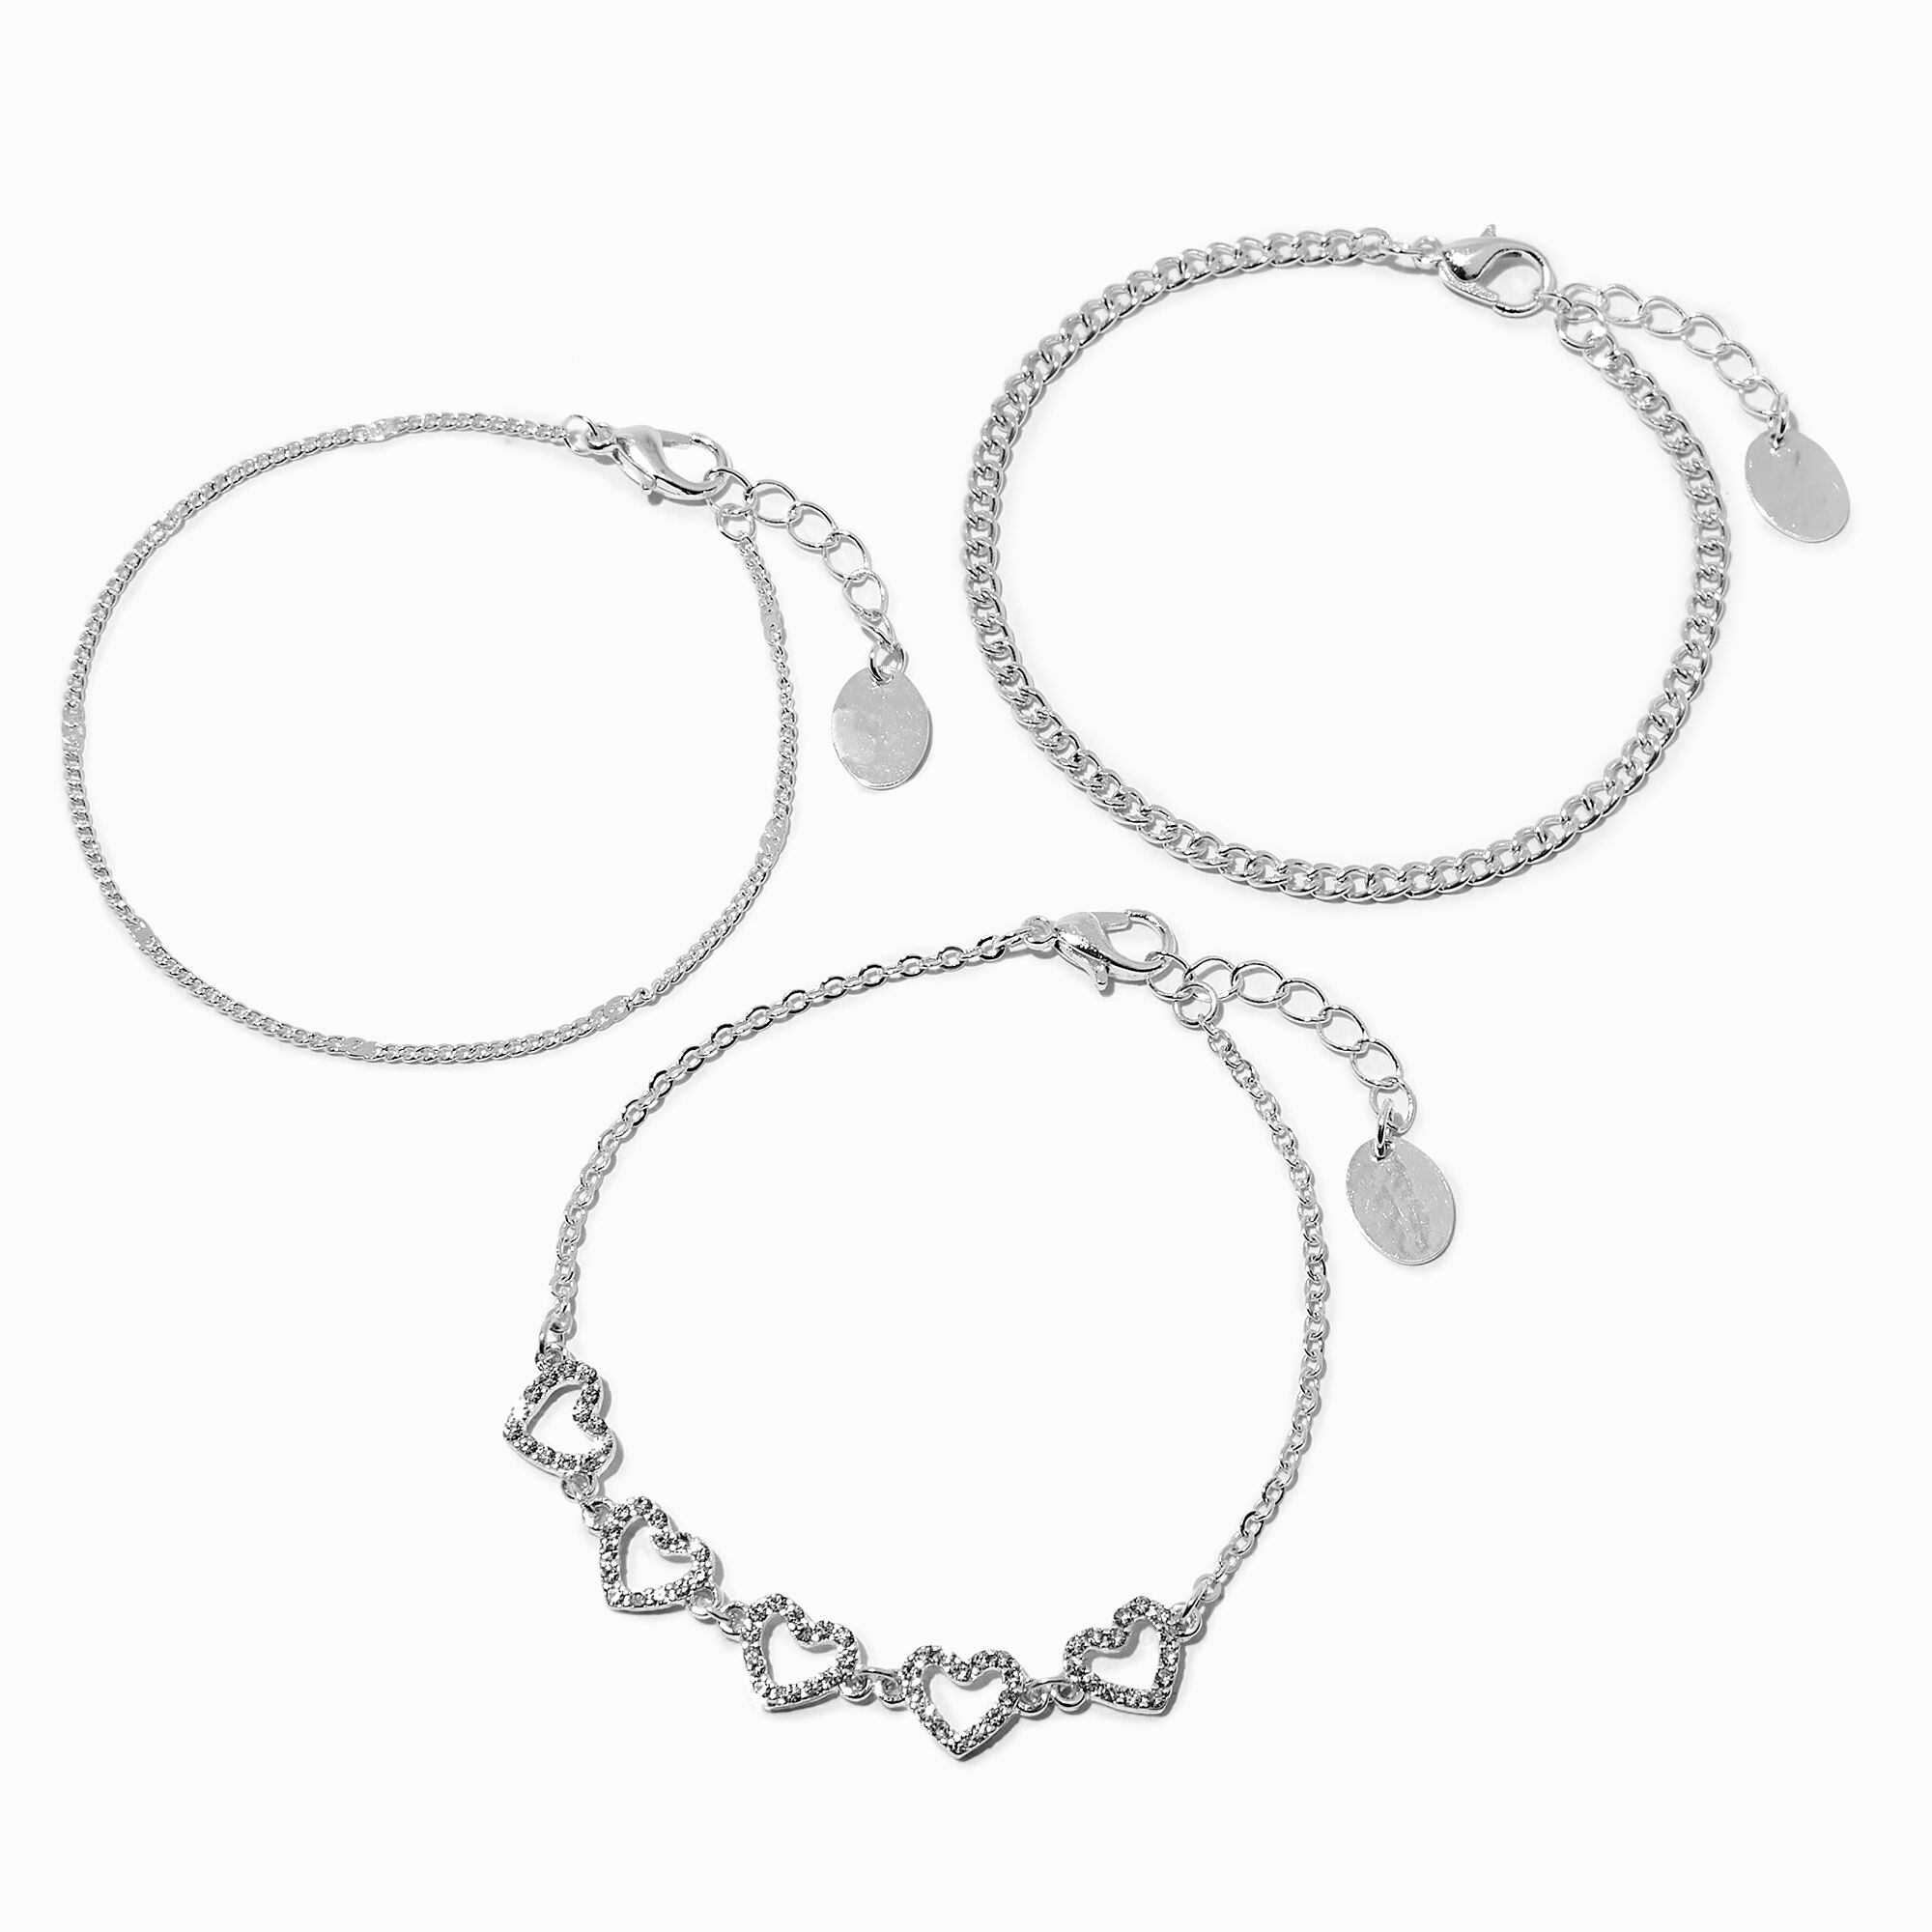 View Claires Tone Crystal Heart Bracelet Set 3 Pack Silver information